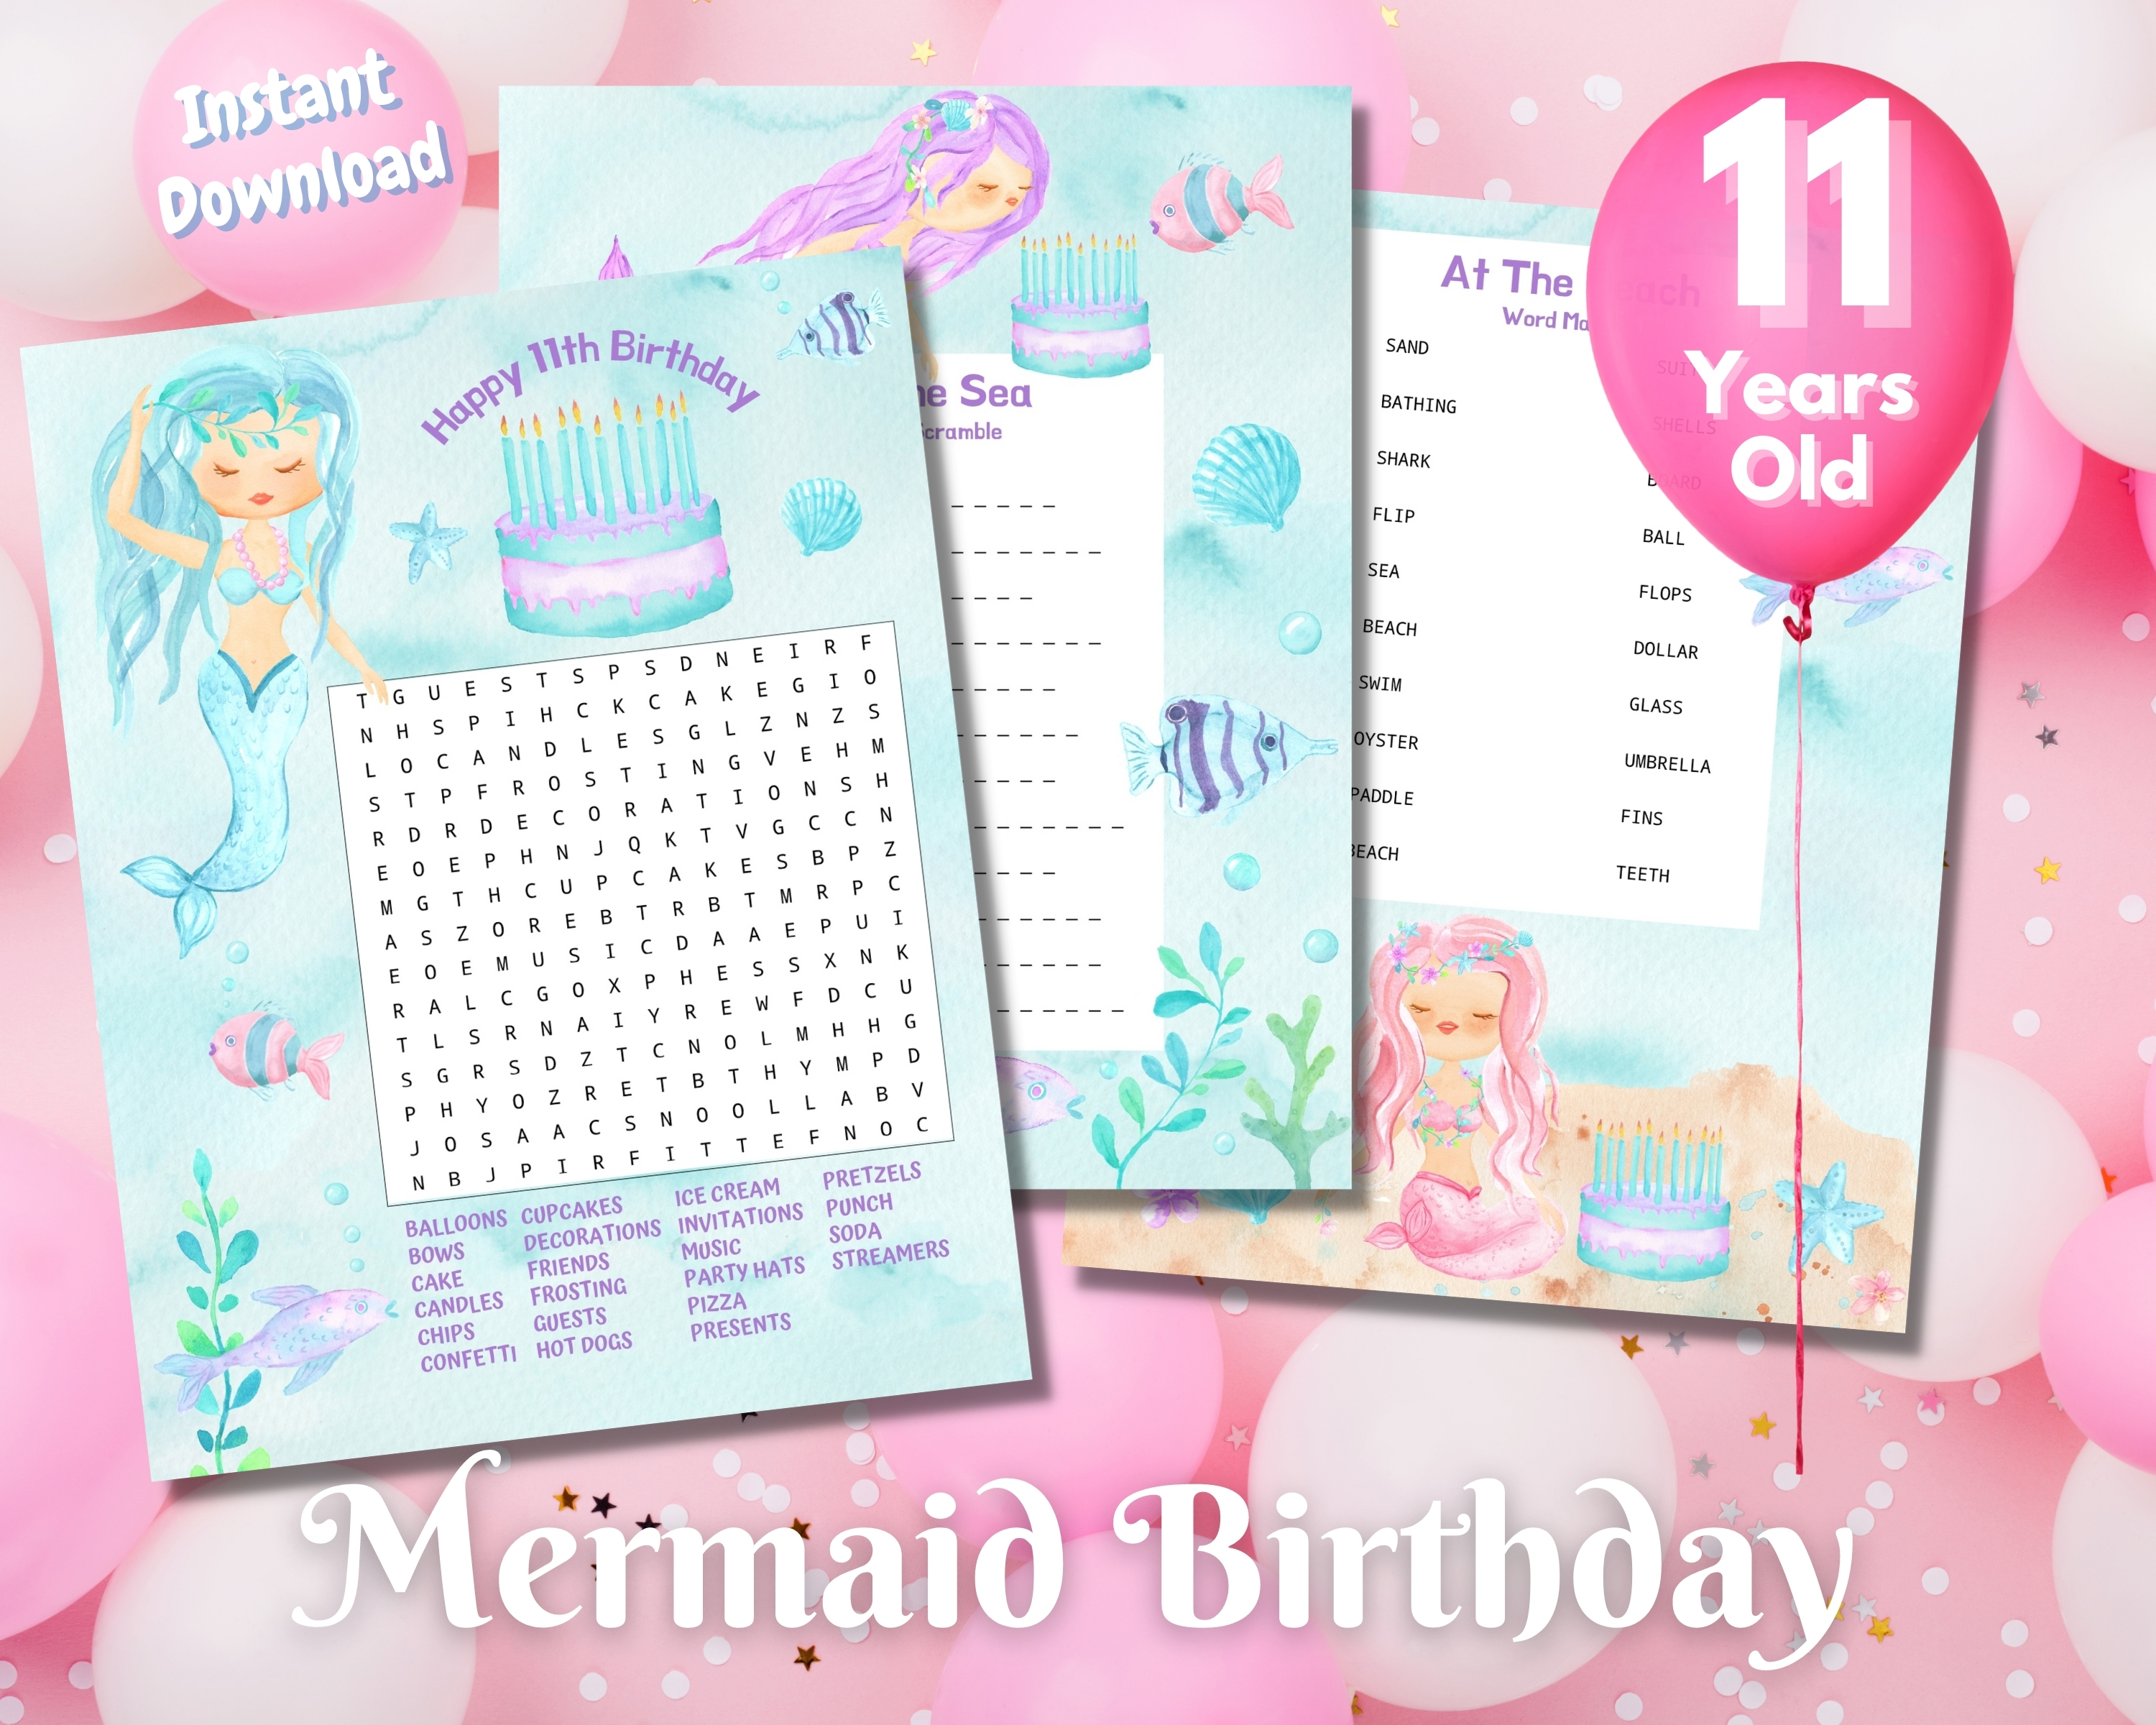 Eleventh Mermaid Birthday Word Puzzles - Light Complexion